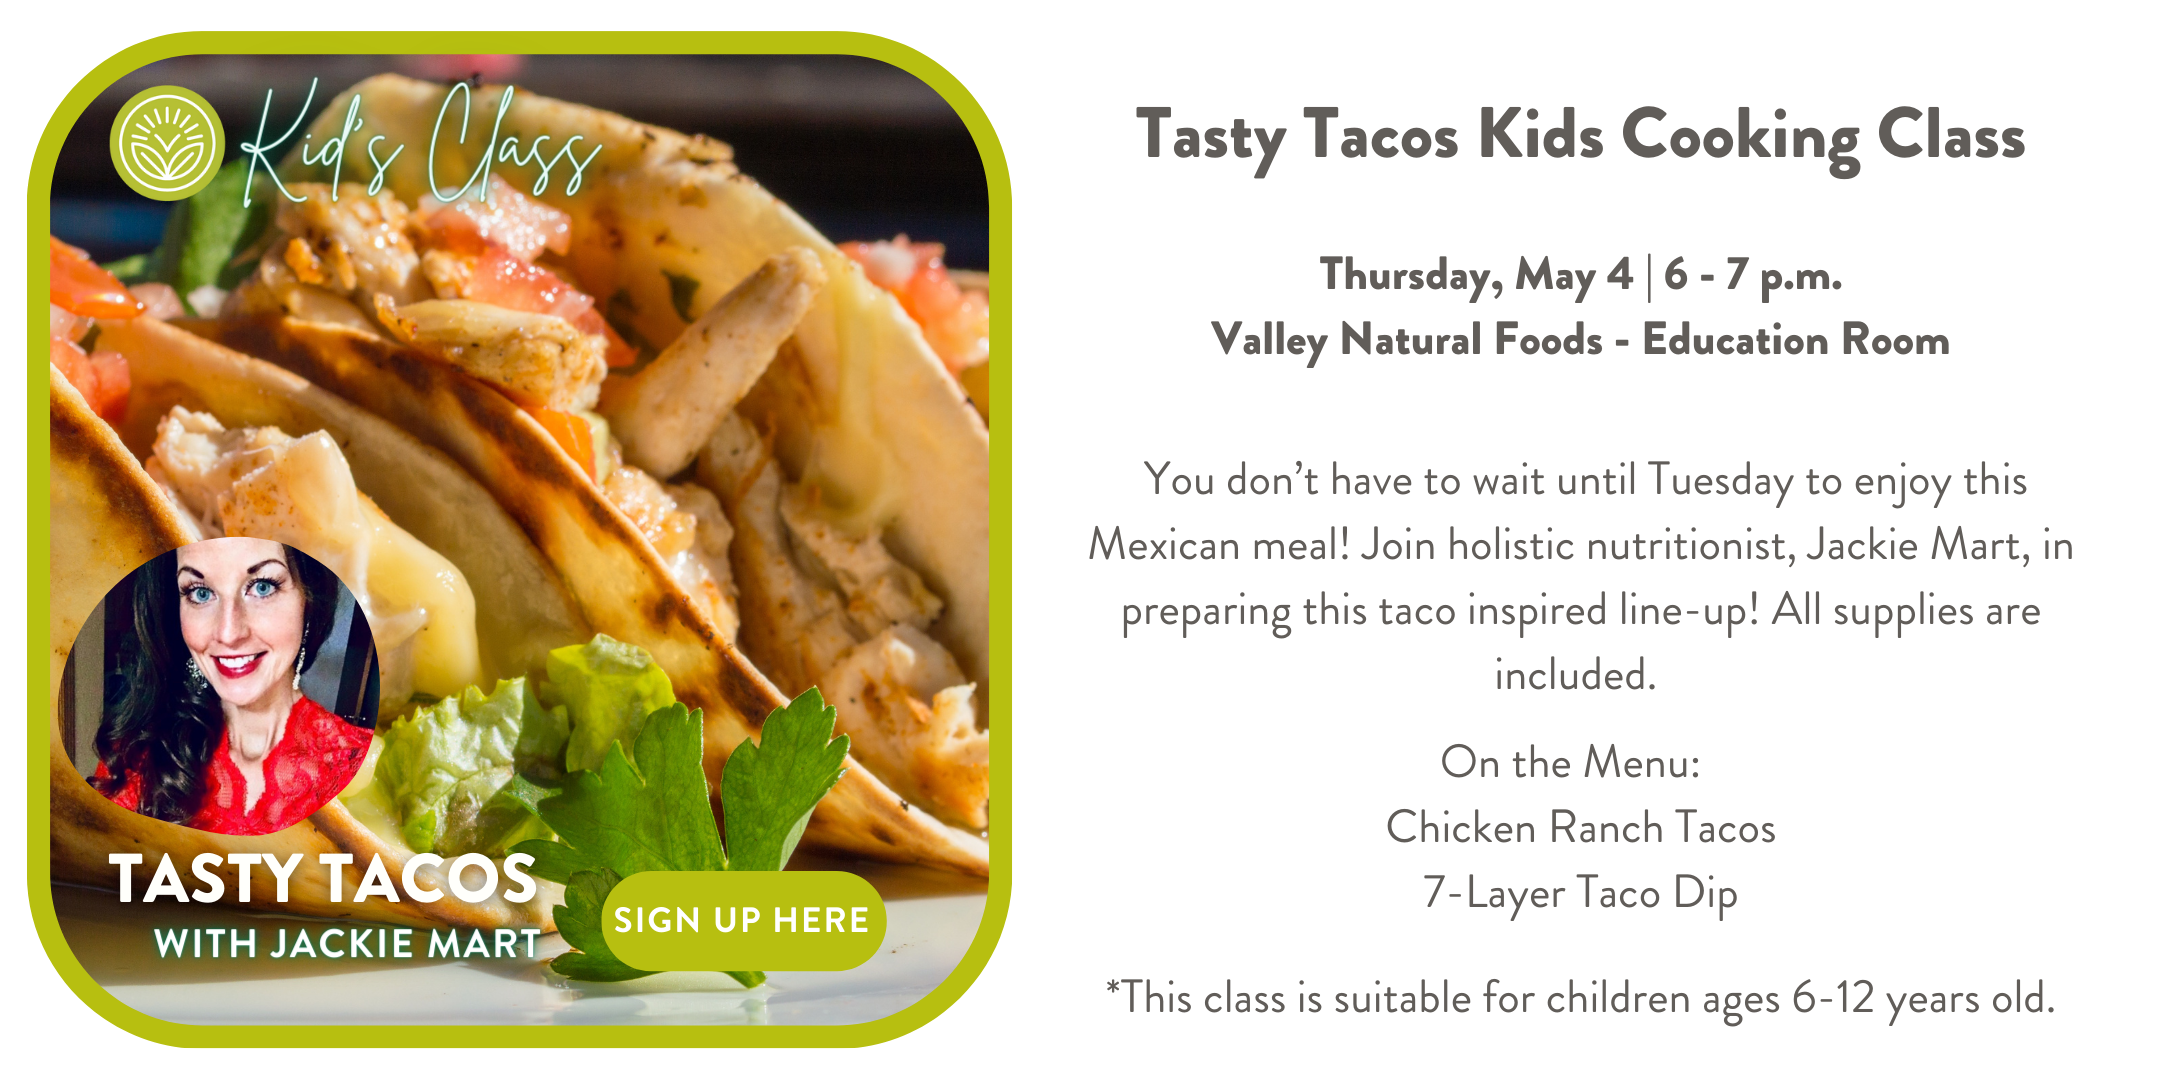 Tasty Tacos (Children’s Cooking Class) 1 hour You don’t have to wait until Tuesday to enjoy this Mexican meal! Join holistic nutritionist, Jackie Mart, in preparing this taco inspired line-up! All supplies are included. On the Menu: Chicken Ranch Tacos 7-Layer Taco Dip